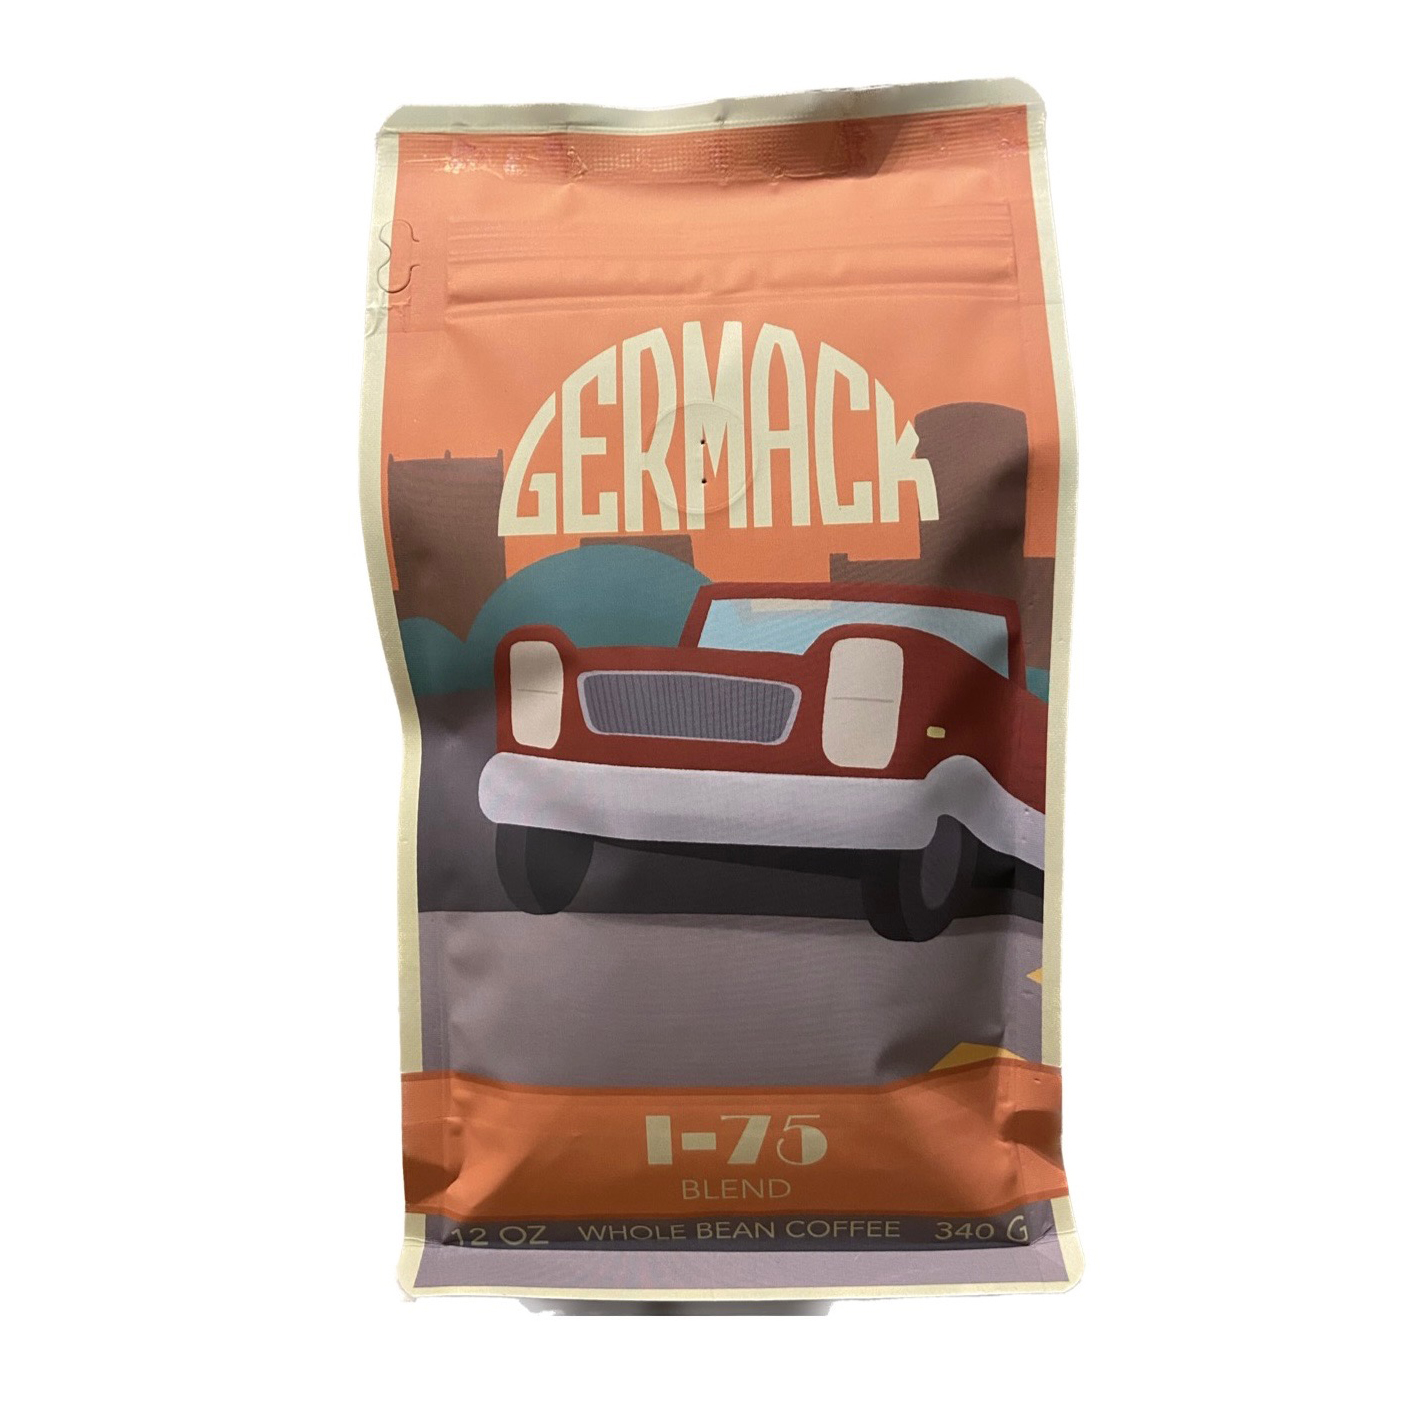 Picture Germack Coffee Blend (12 oz.) - I-75 (C8)